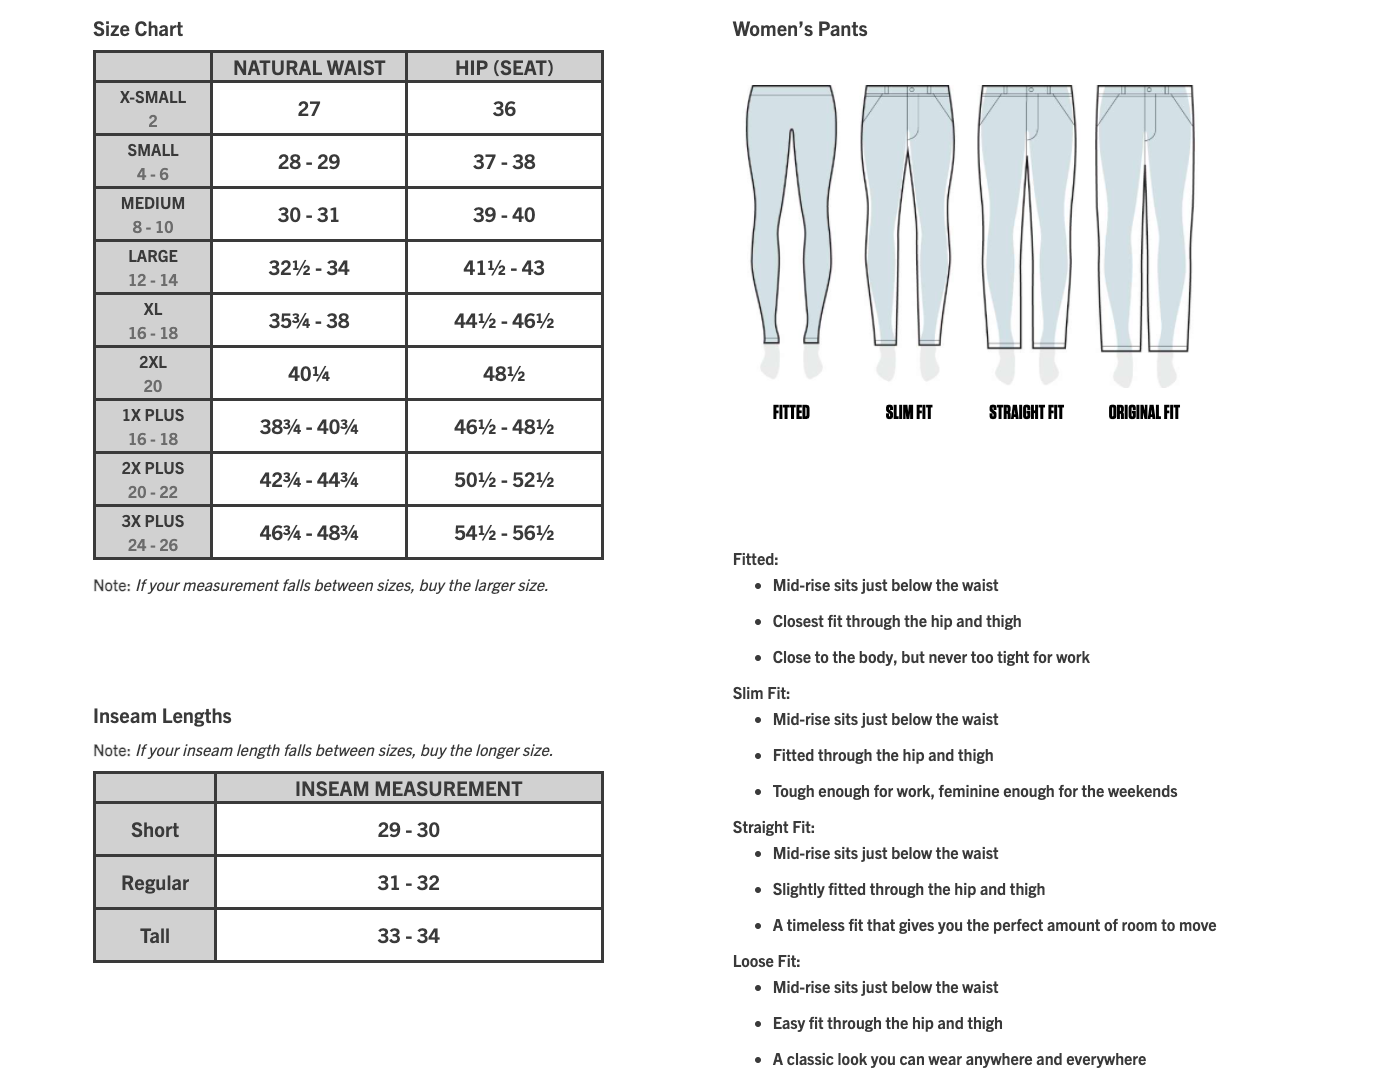 Force Fitted Midweight Utility Legging